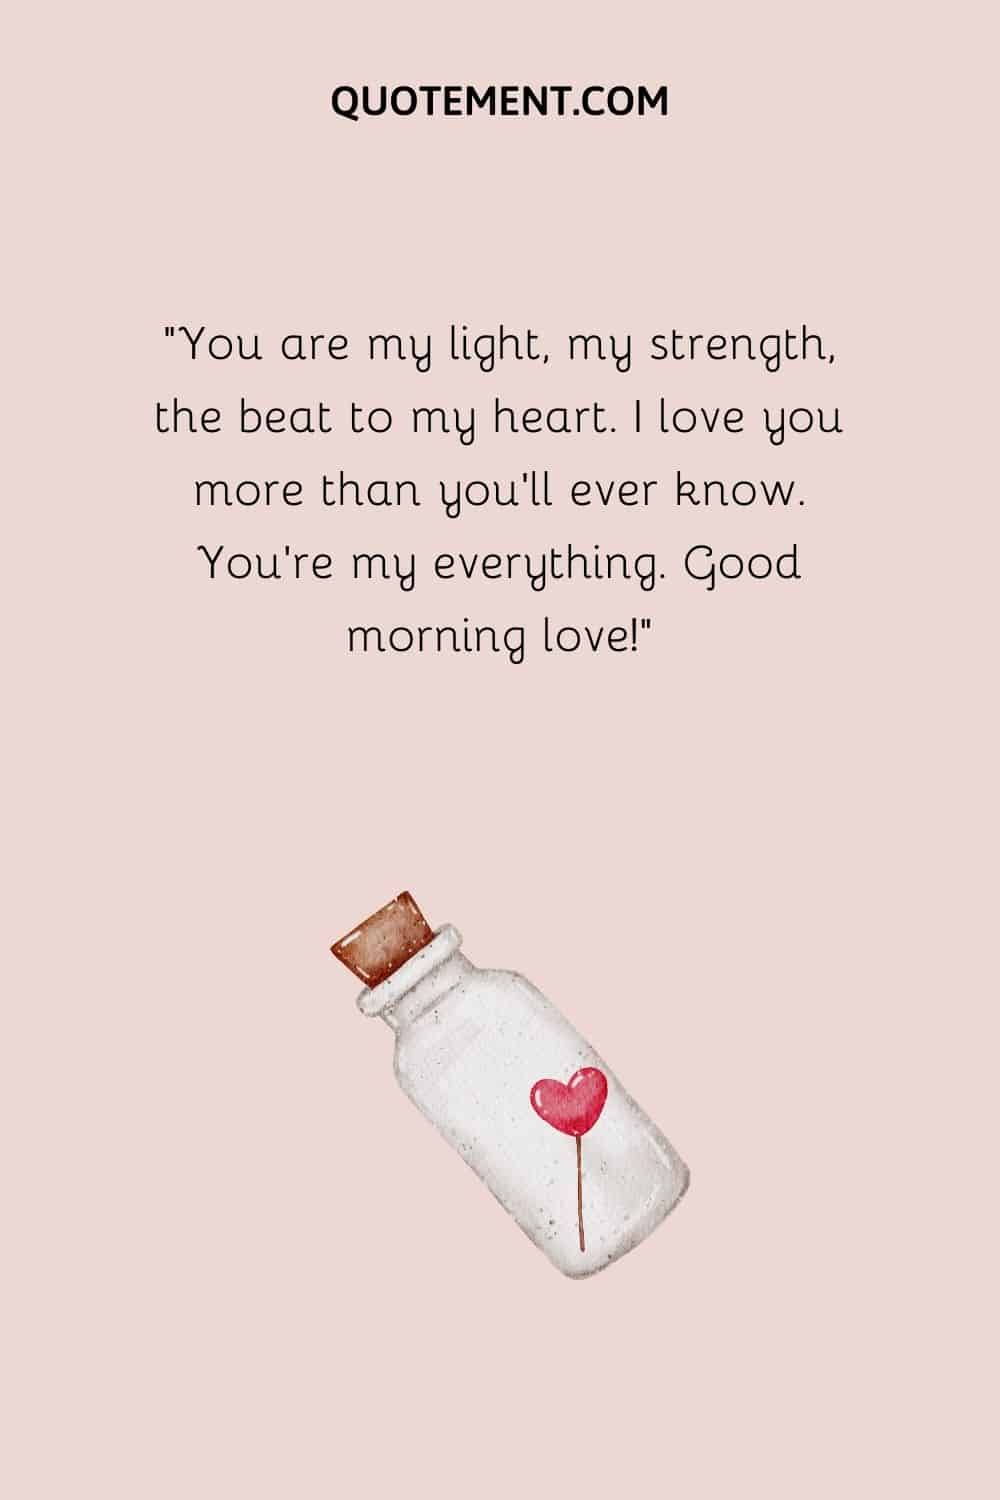 You are my light, my strength, the beat to my heart. I love you more than you’ll ever know. You’re my everything. Good morning love!